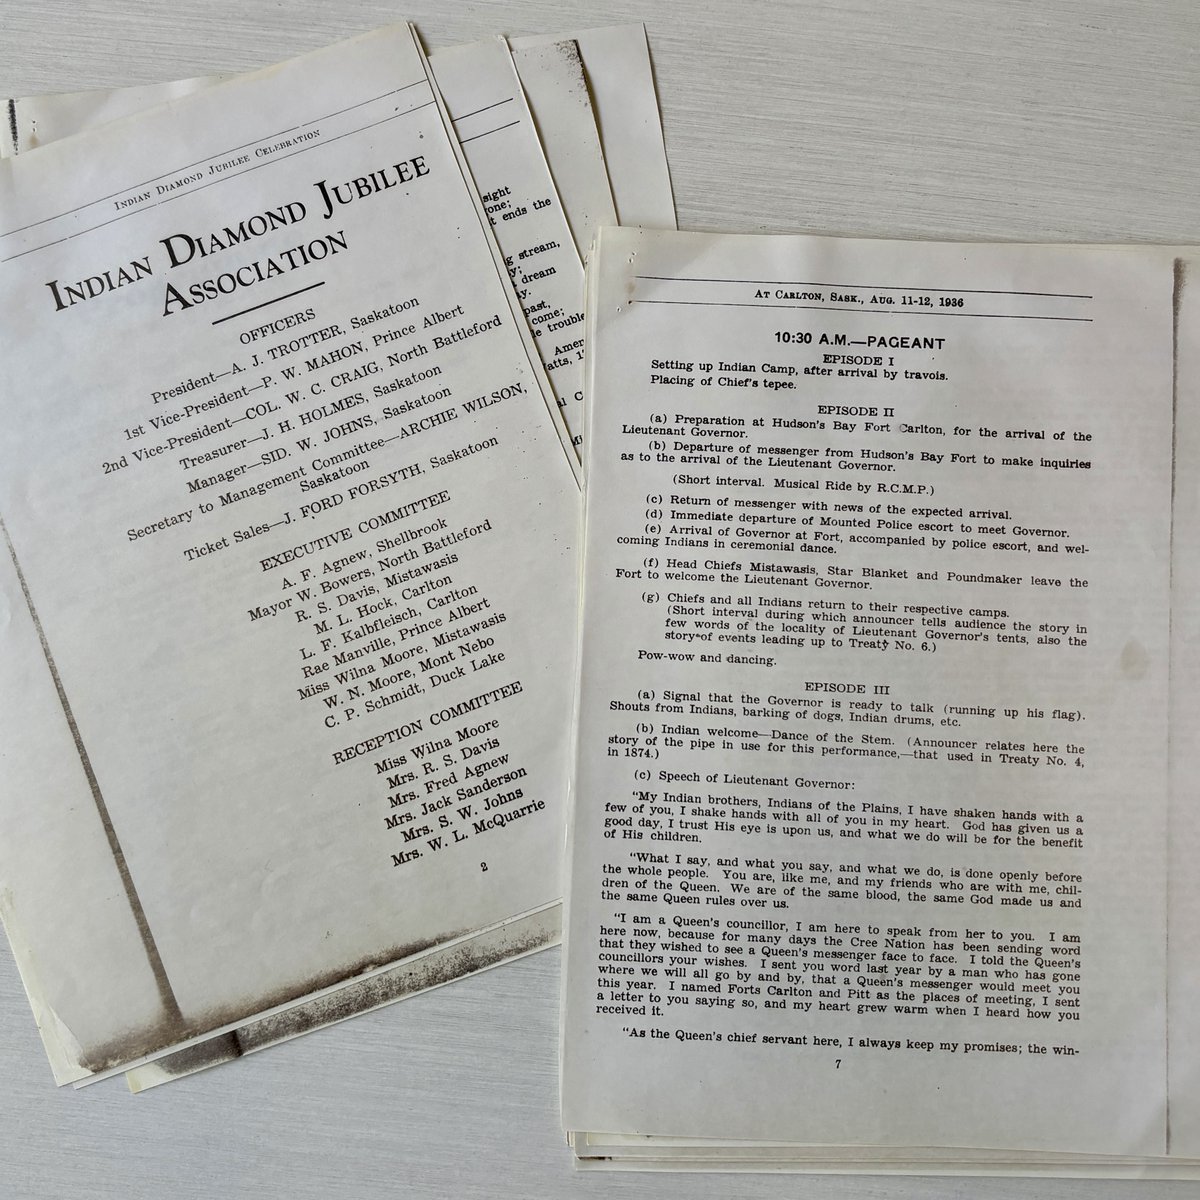 Another record of the Diamond Jubilee Celebration of Treaty 6 is the programme for the event itself ((S)X 16). The programme includes the members of the Indian Diamond Jubilee Association and the lines for a pageant detailing the history of Treaty 6 territory.